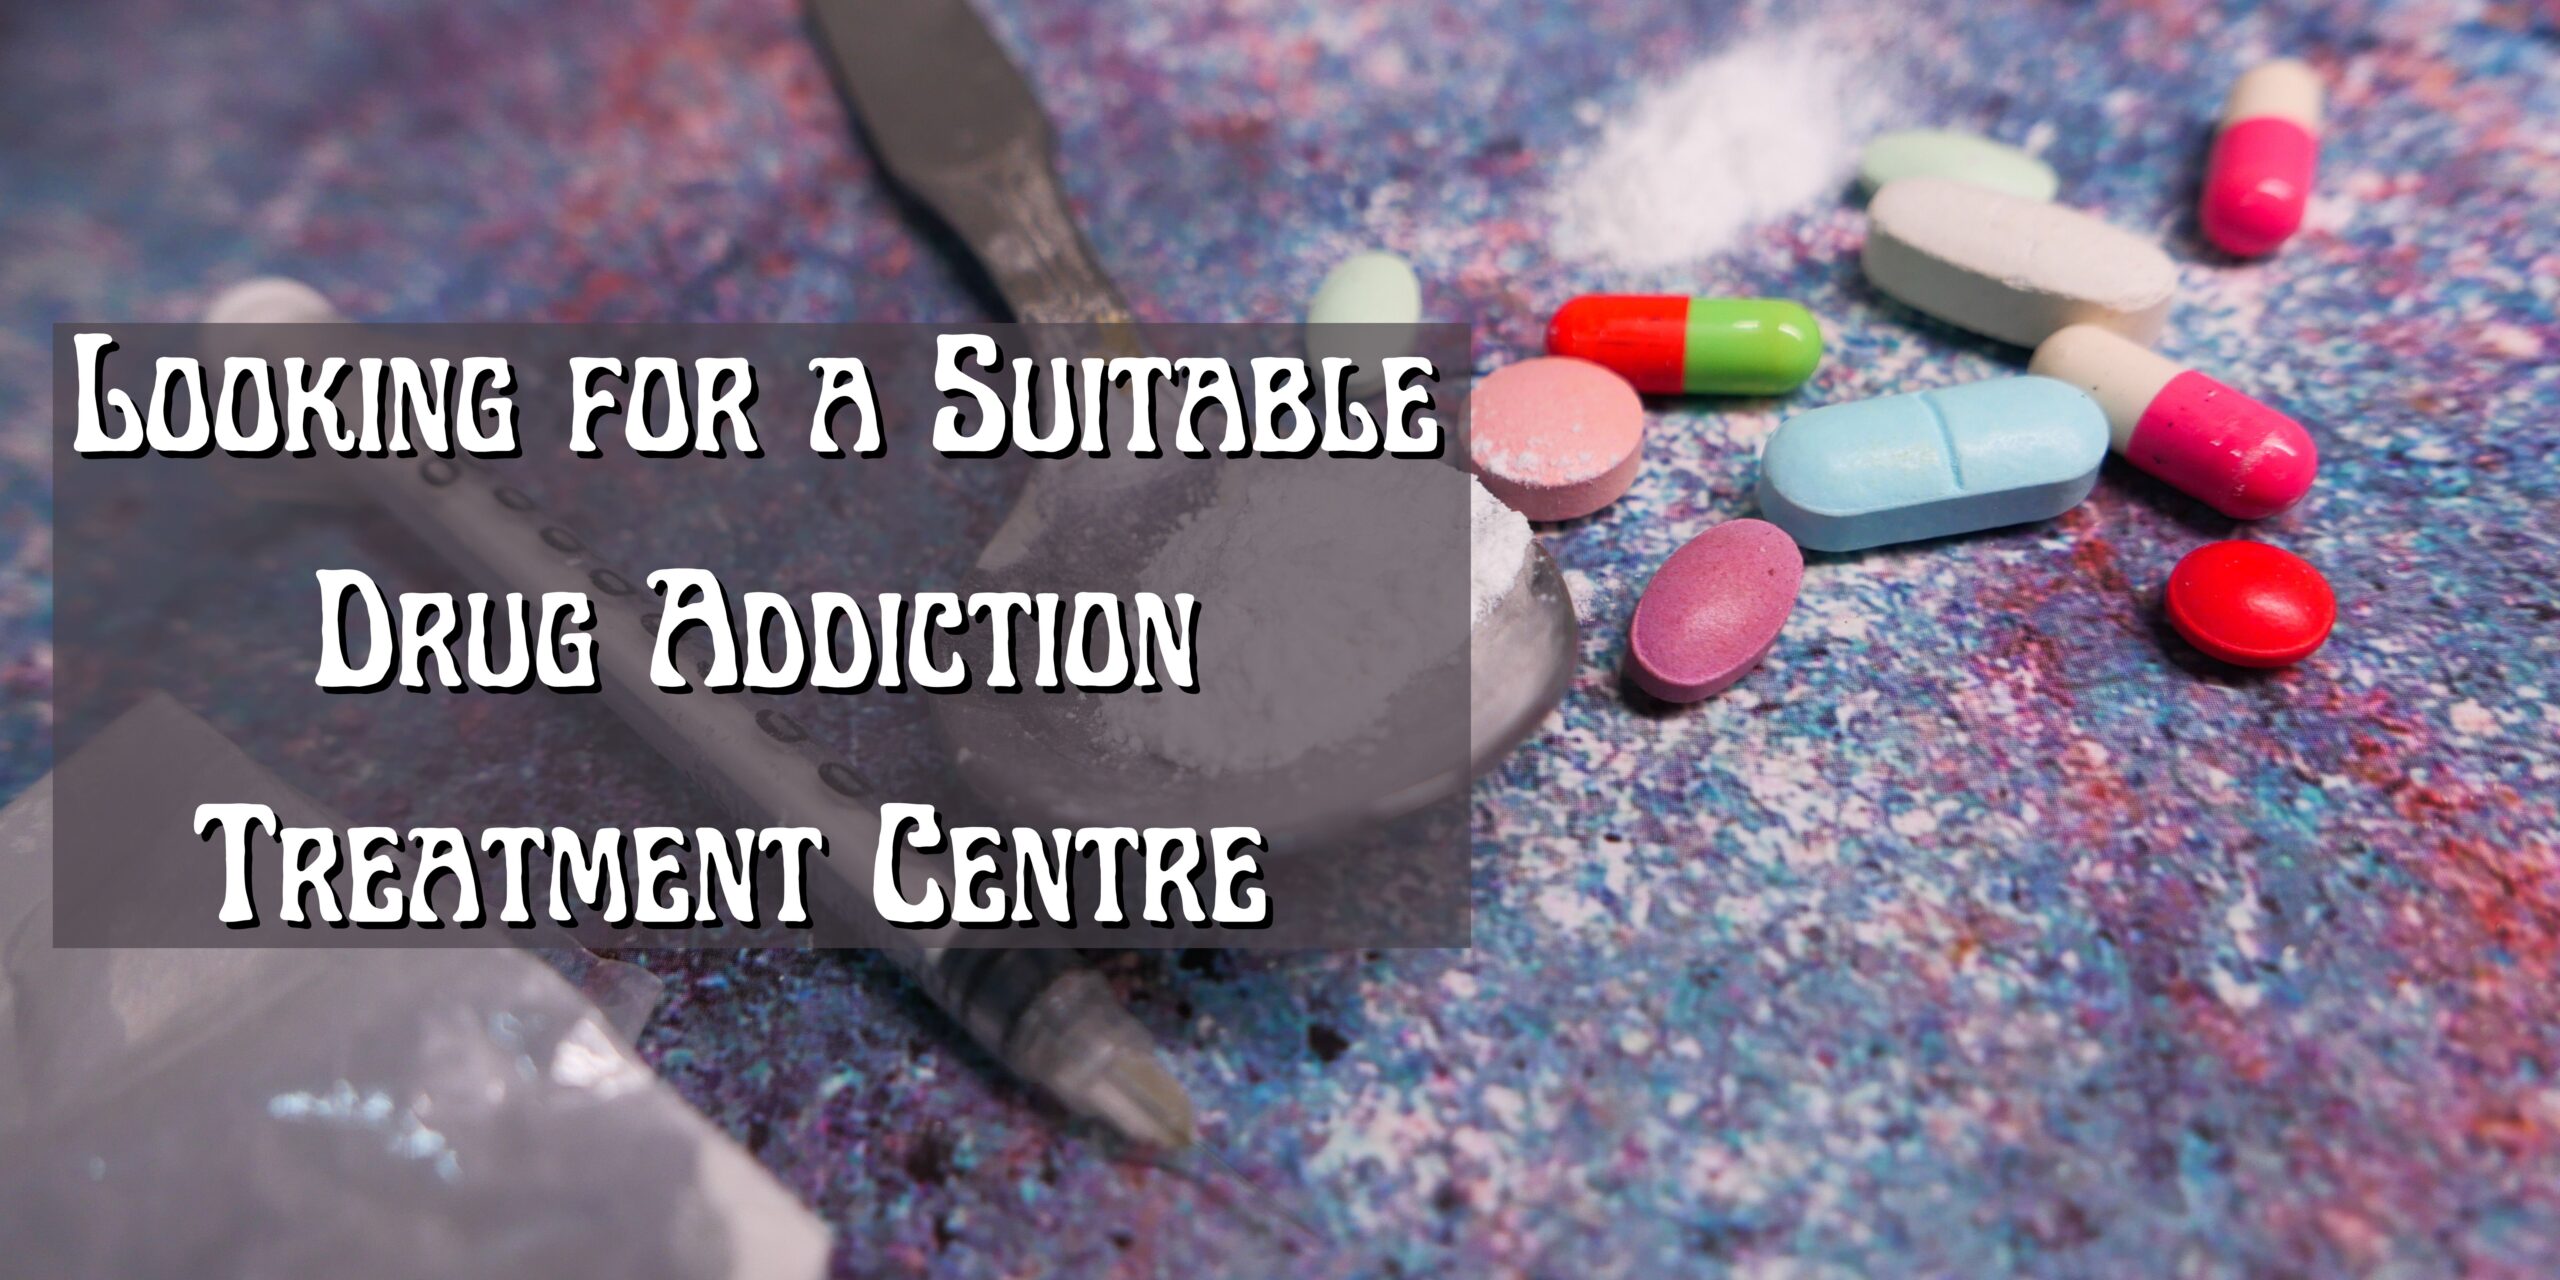 Looking for a Suitable Drug Addiction Treatment Centre